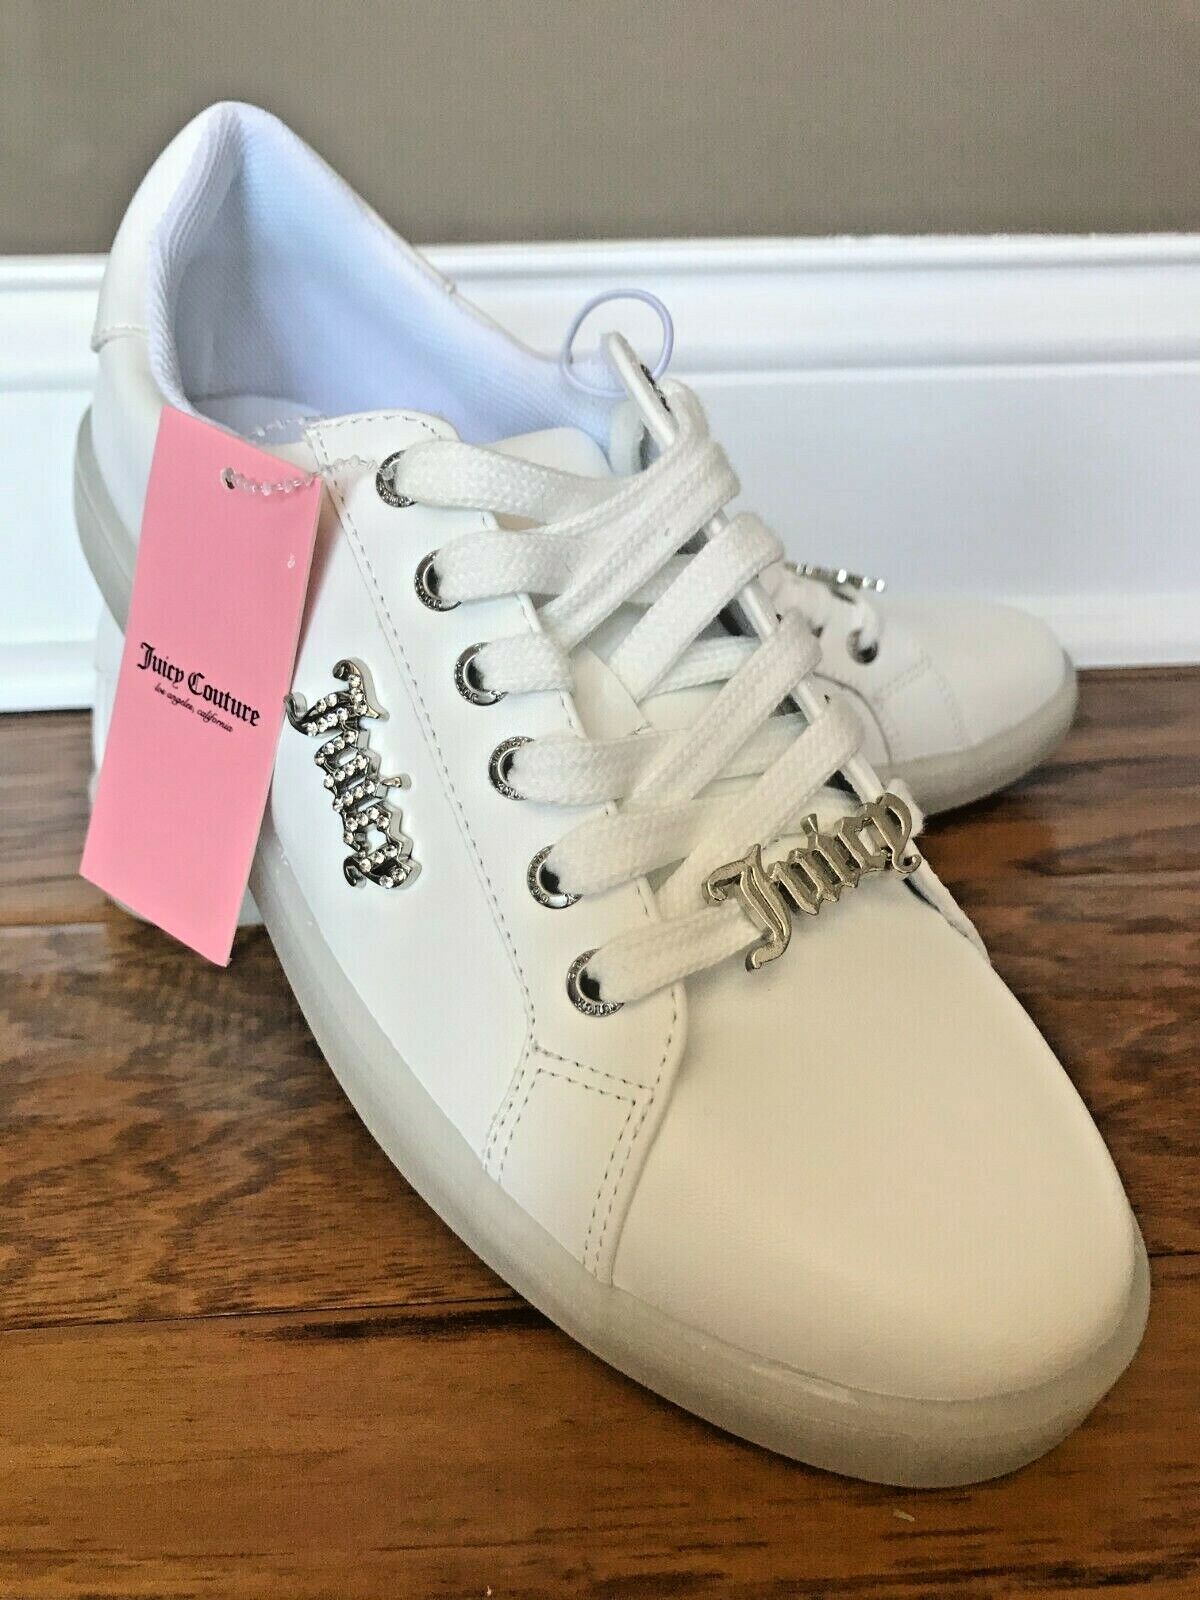 Juicy Couture Verity Velour Sneakers Powder Blue - Women's Trainers